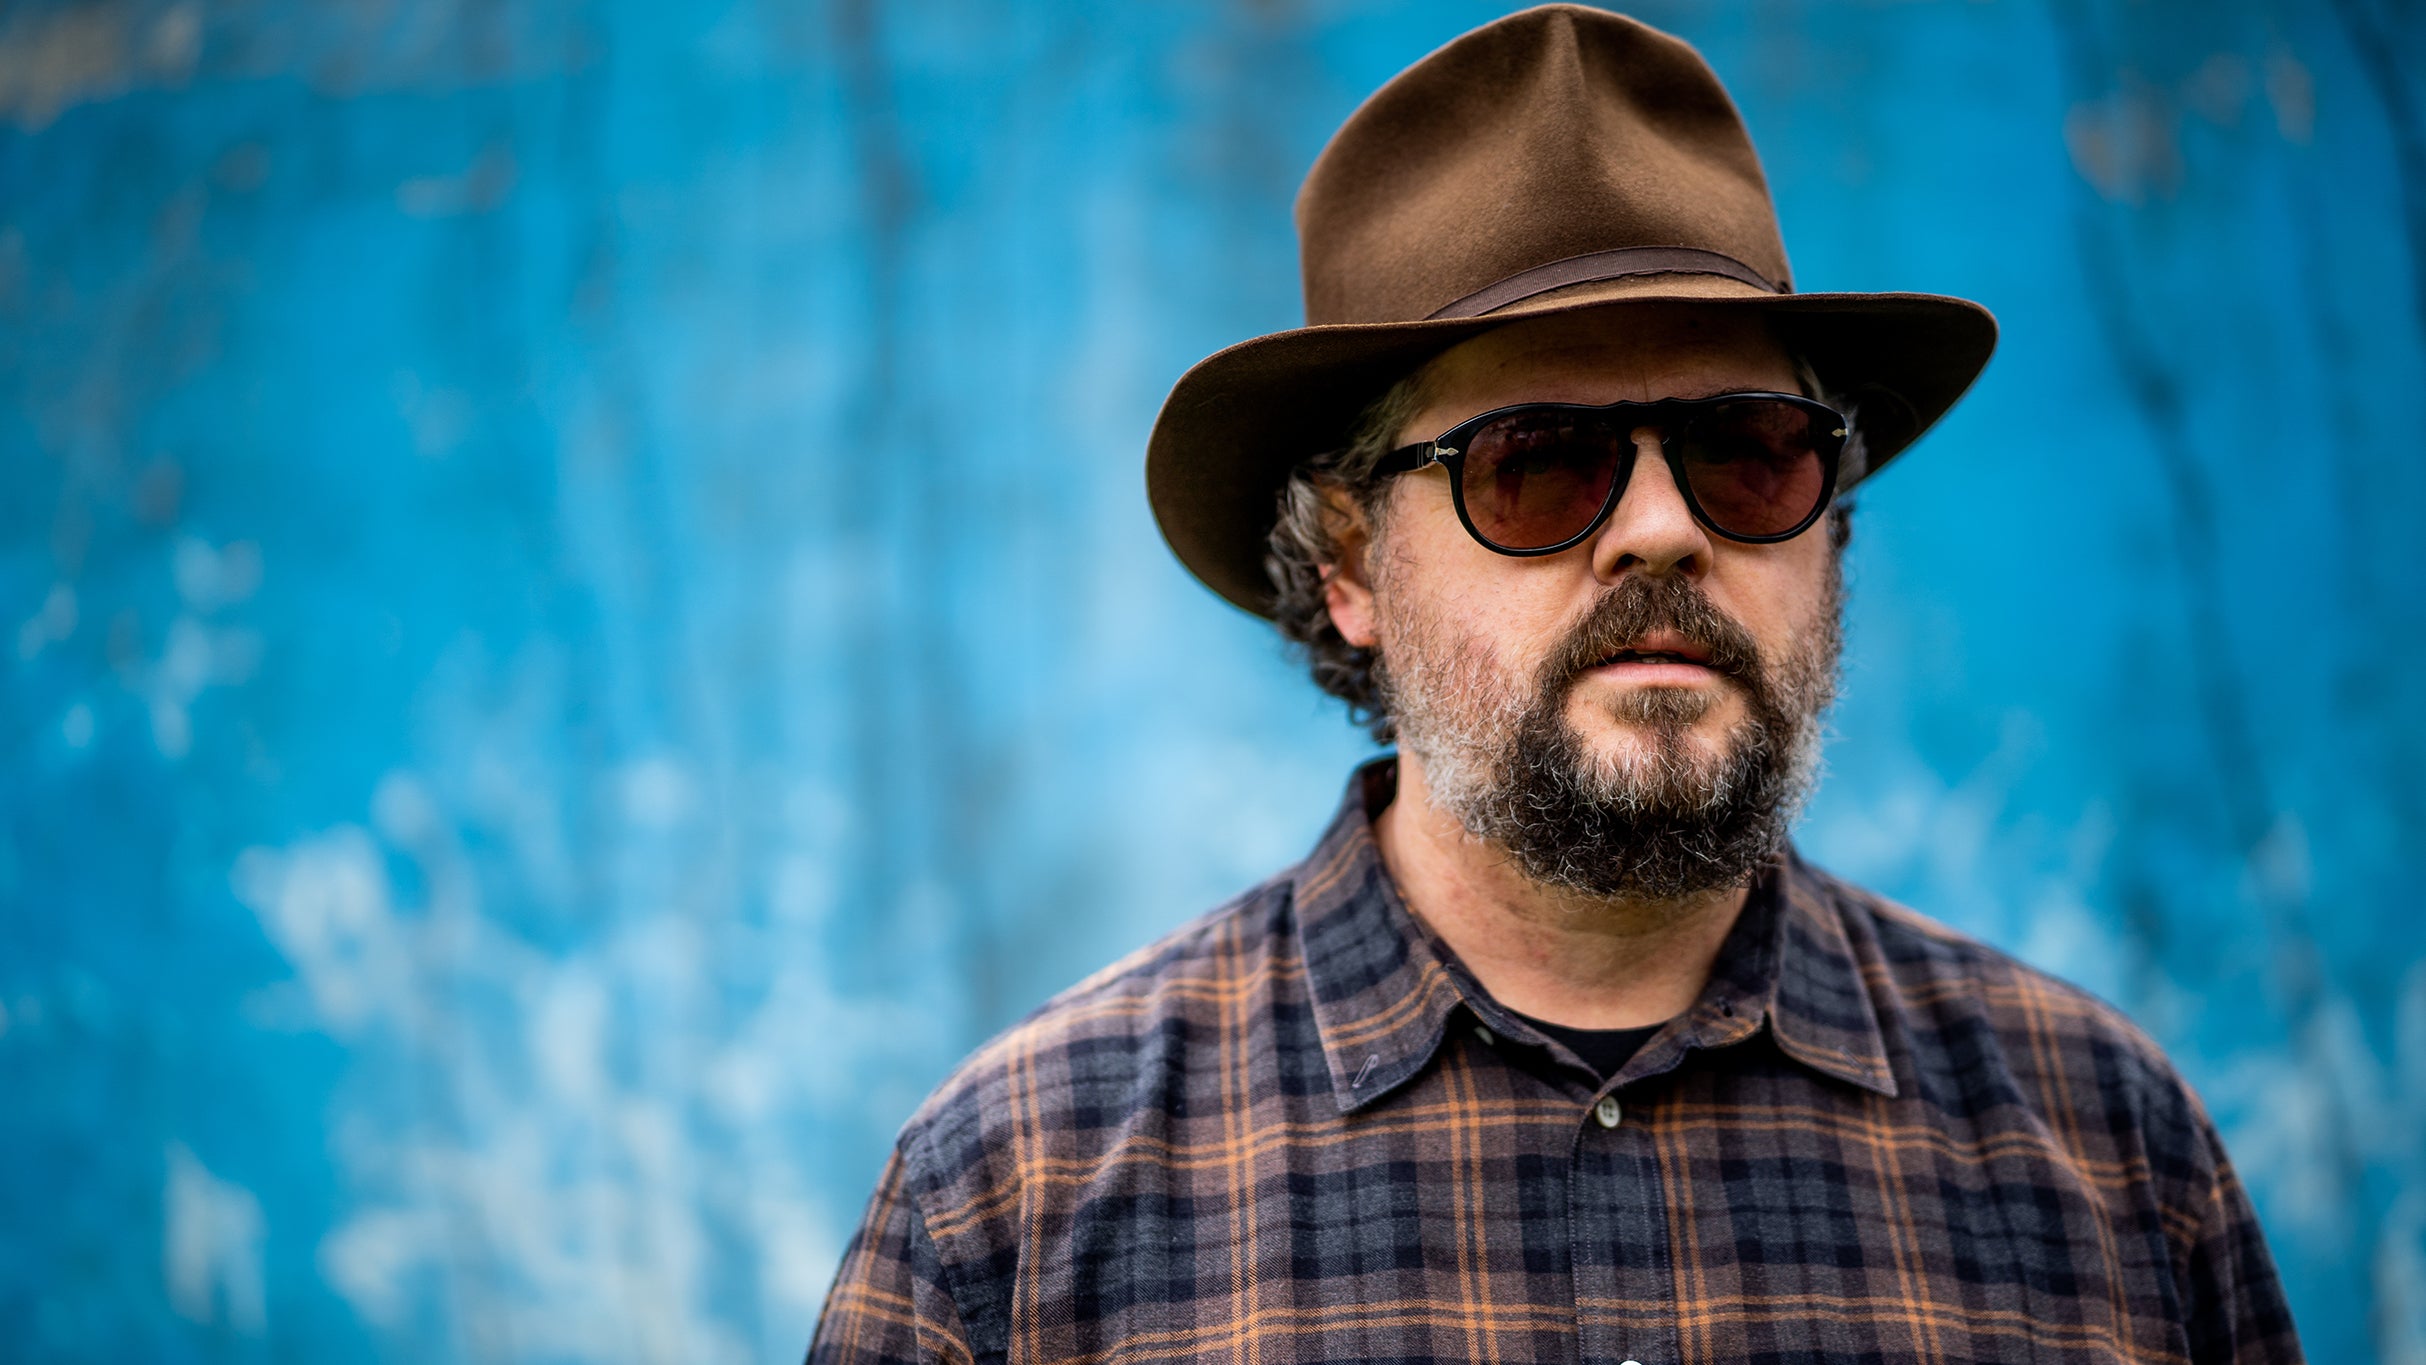 An Evening With Patterson Hood (of Drive-By Truckers) free pre-sale password for early tickets in Denver